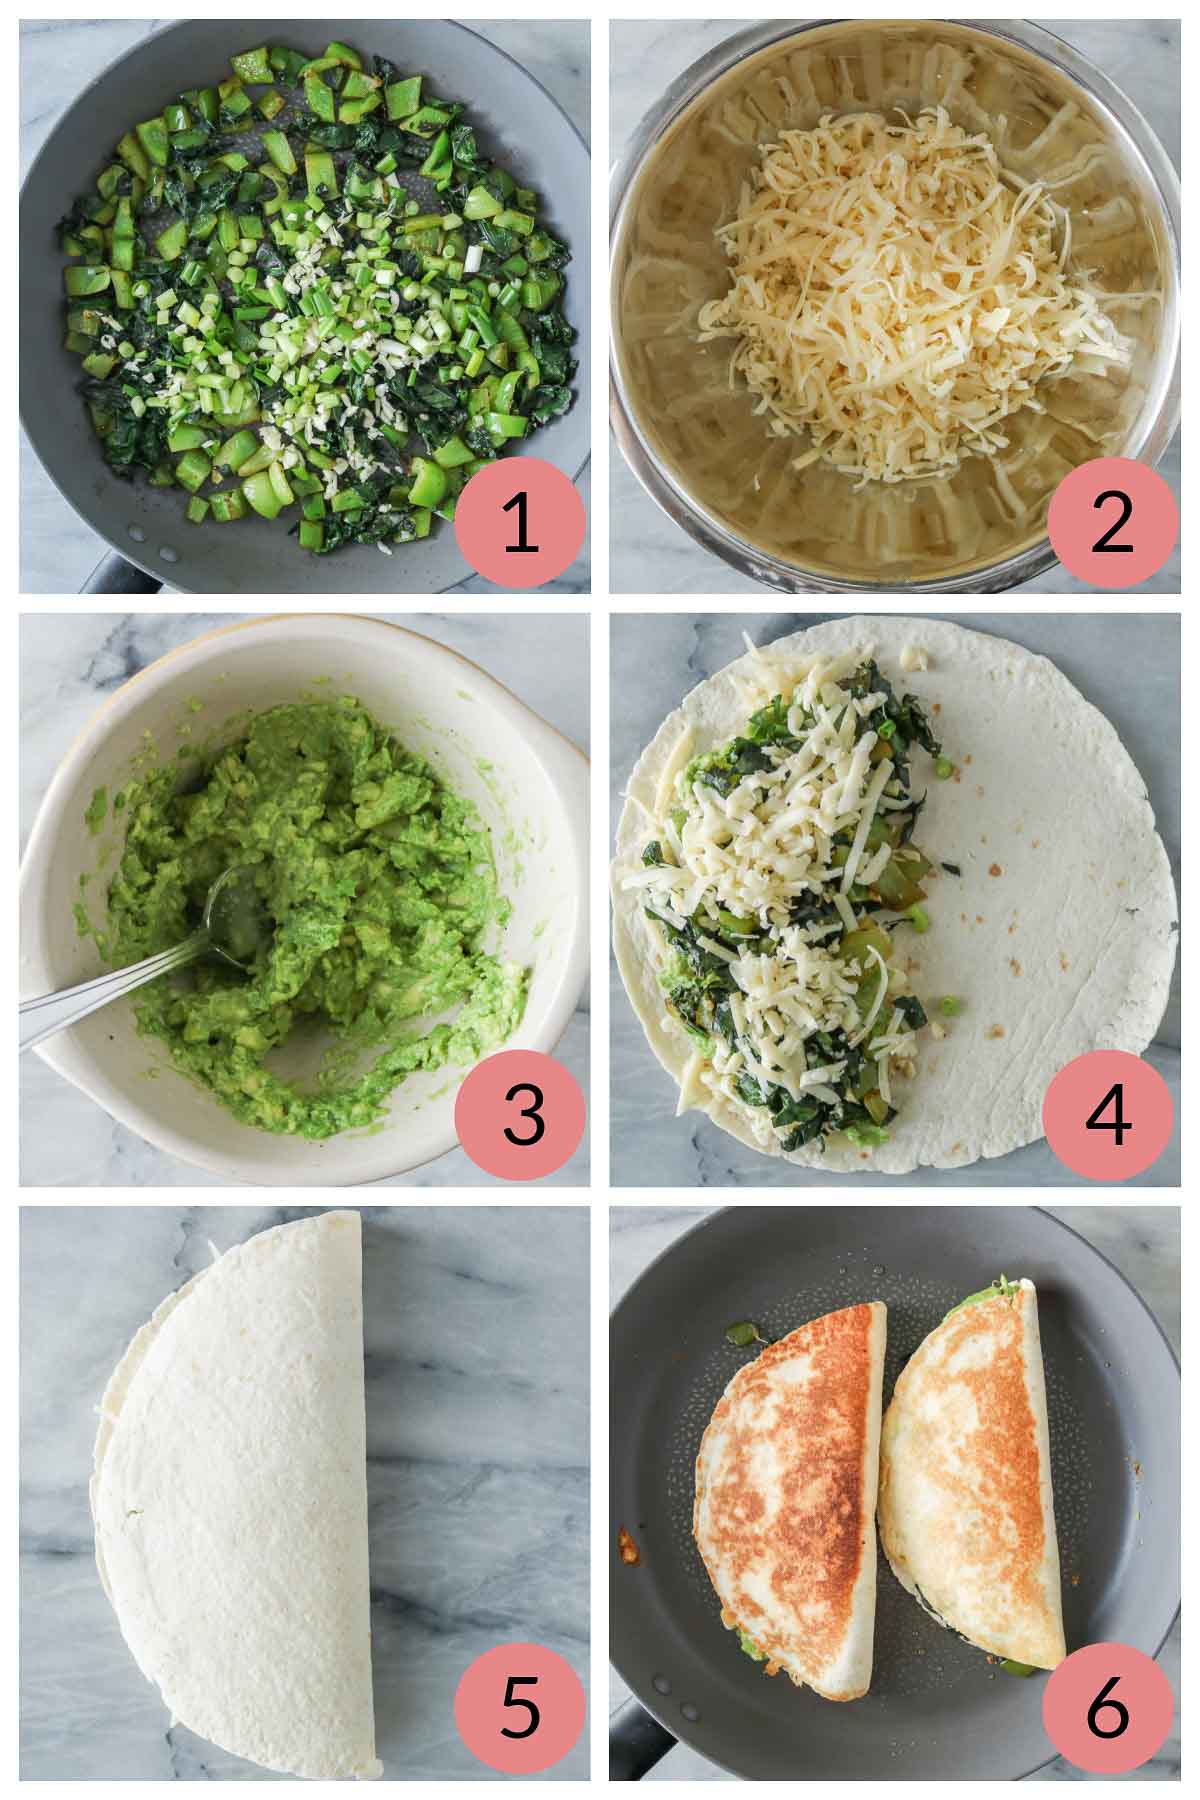 Collage of steps to make quesadillas with avocado and veggies.